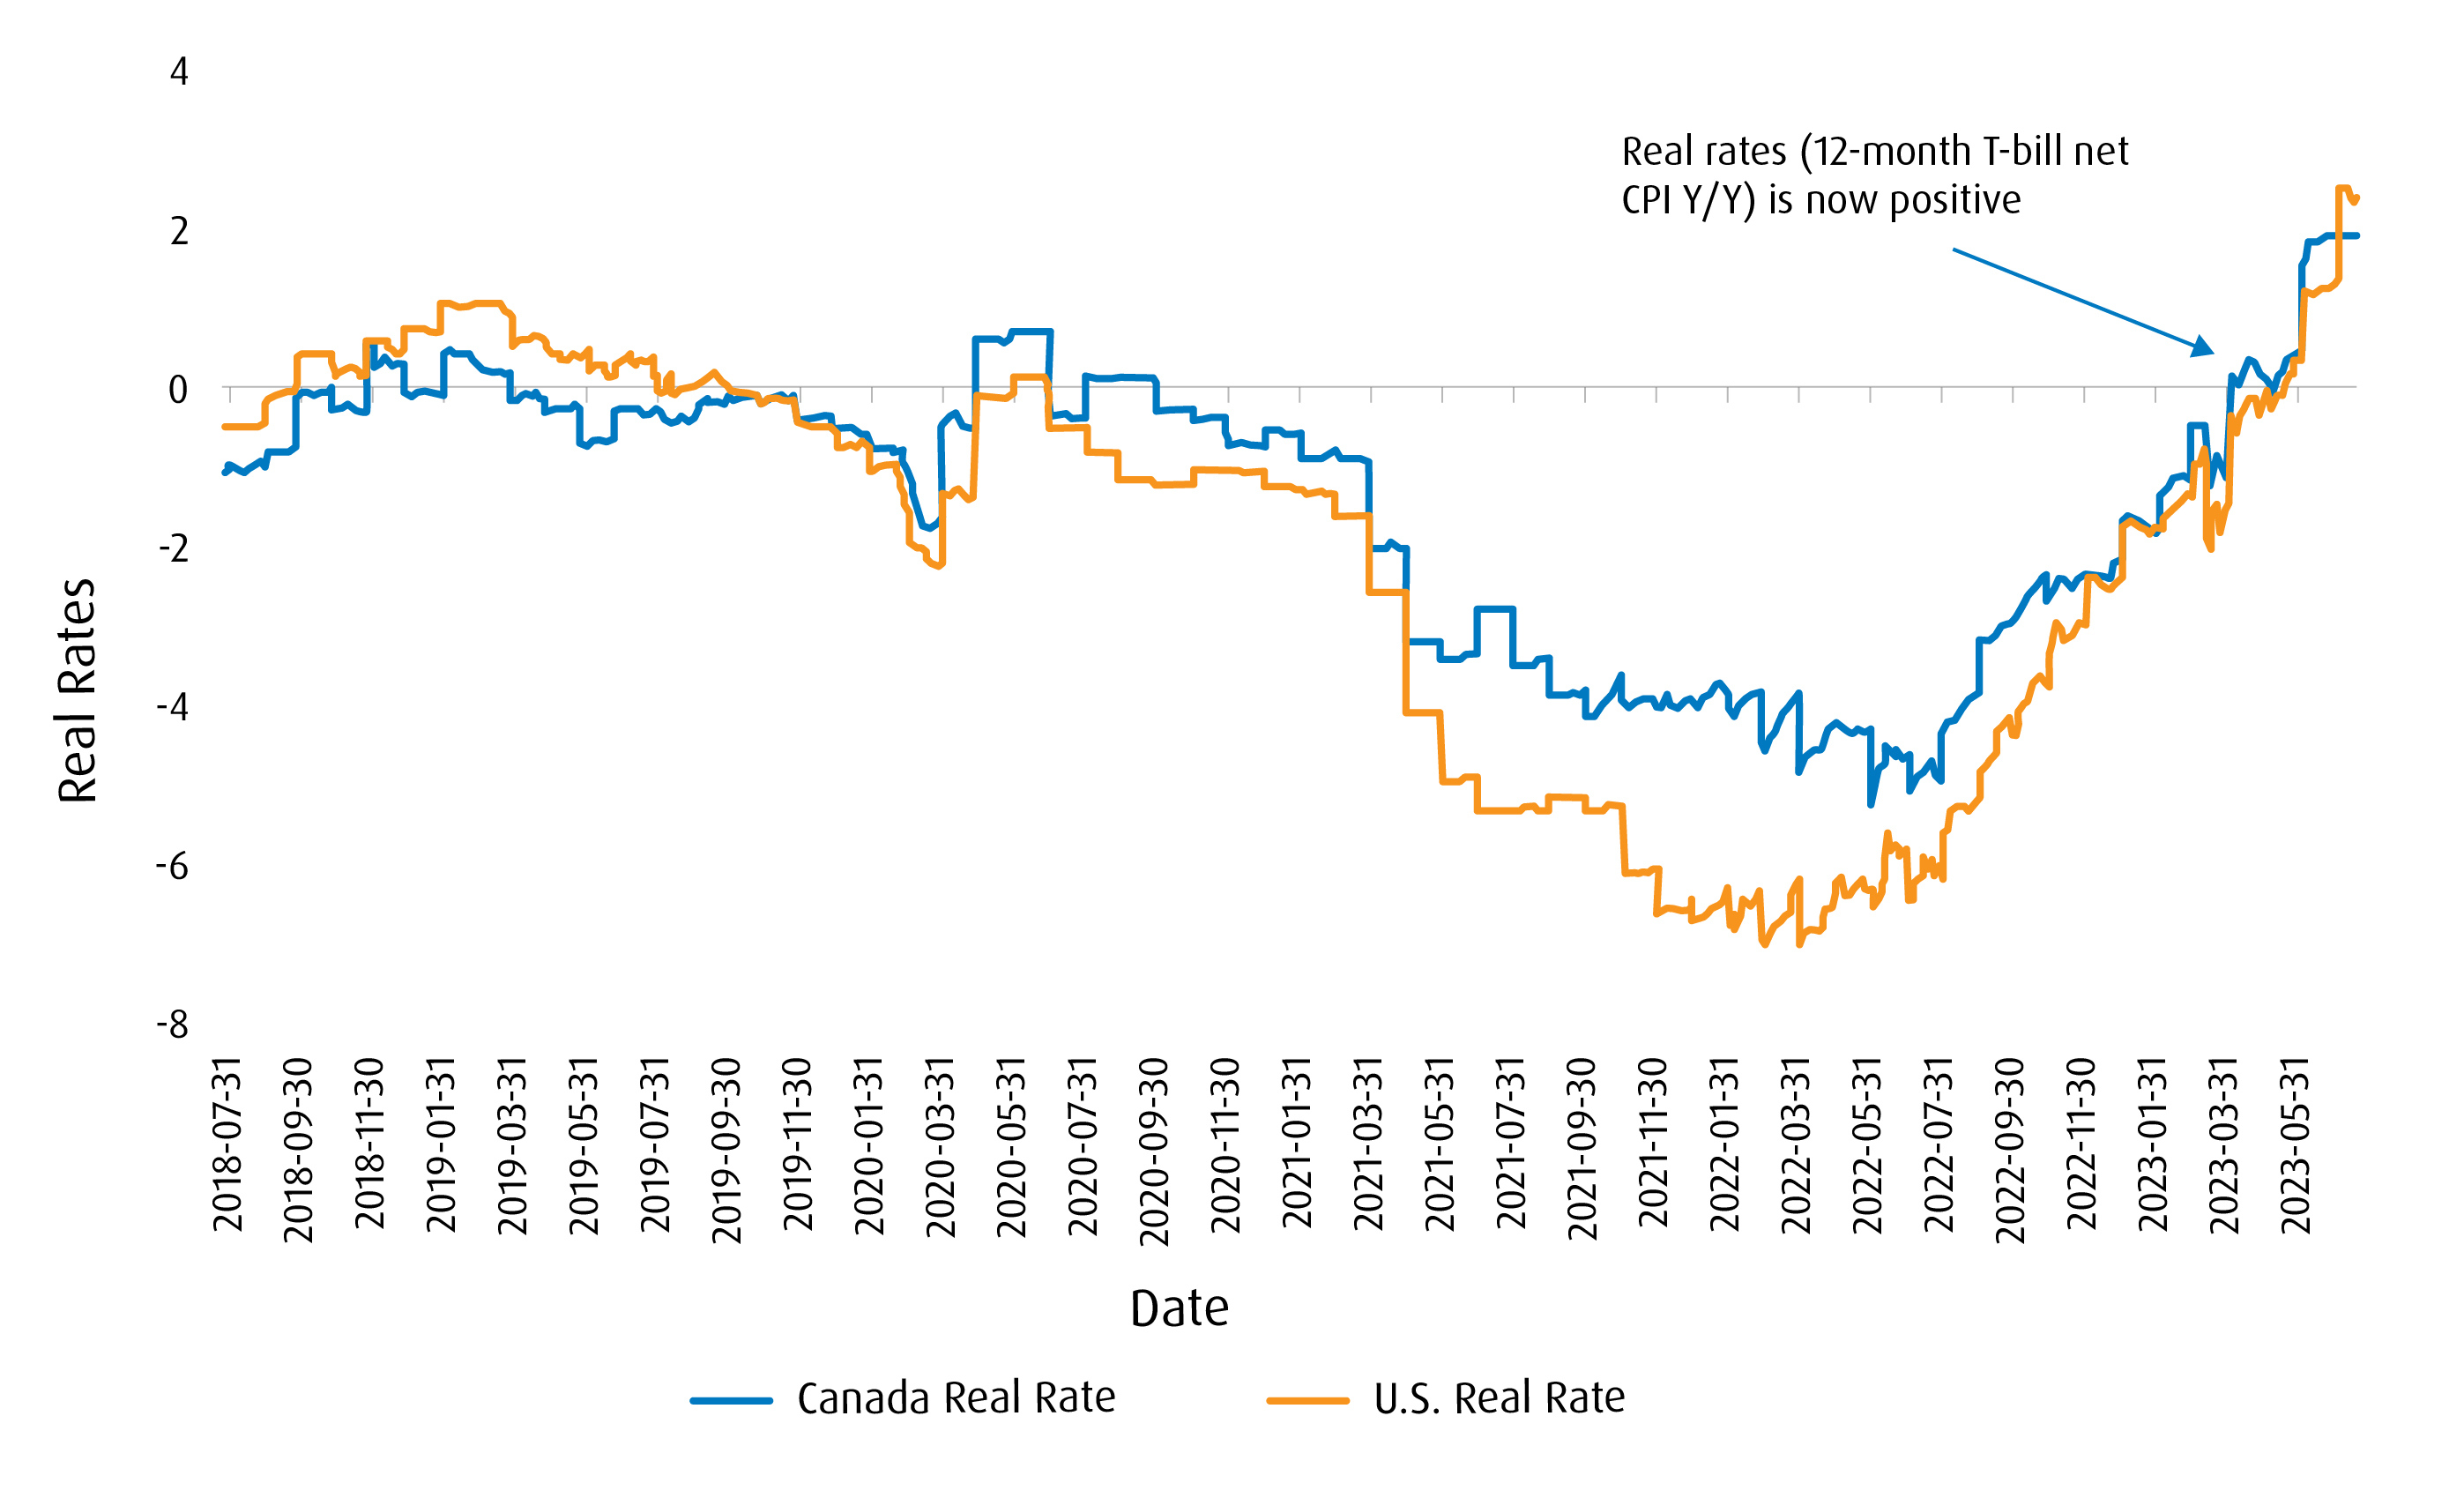 Real rates in Canada vs. the U.S.